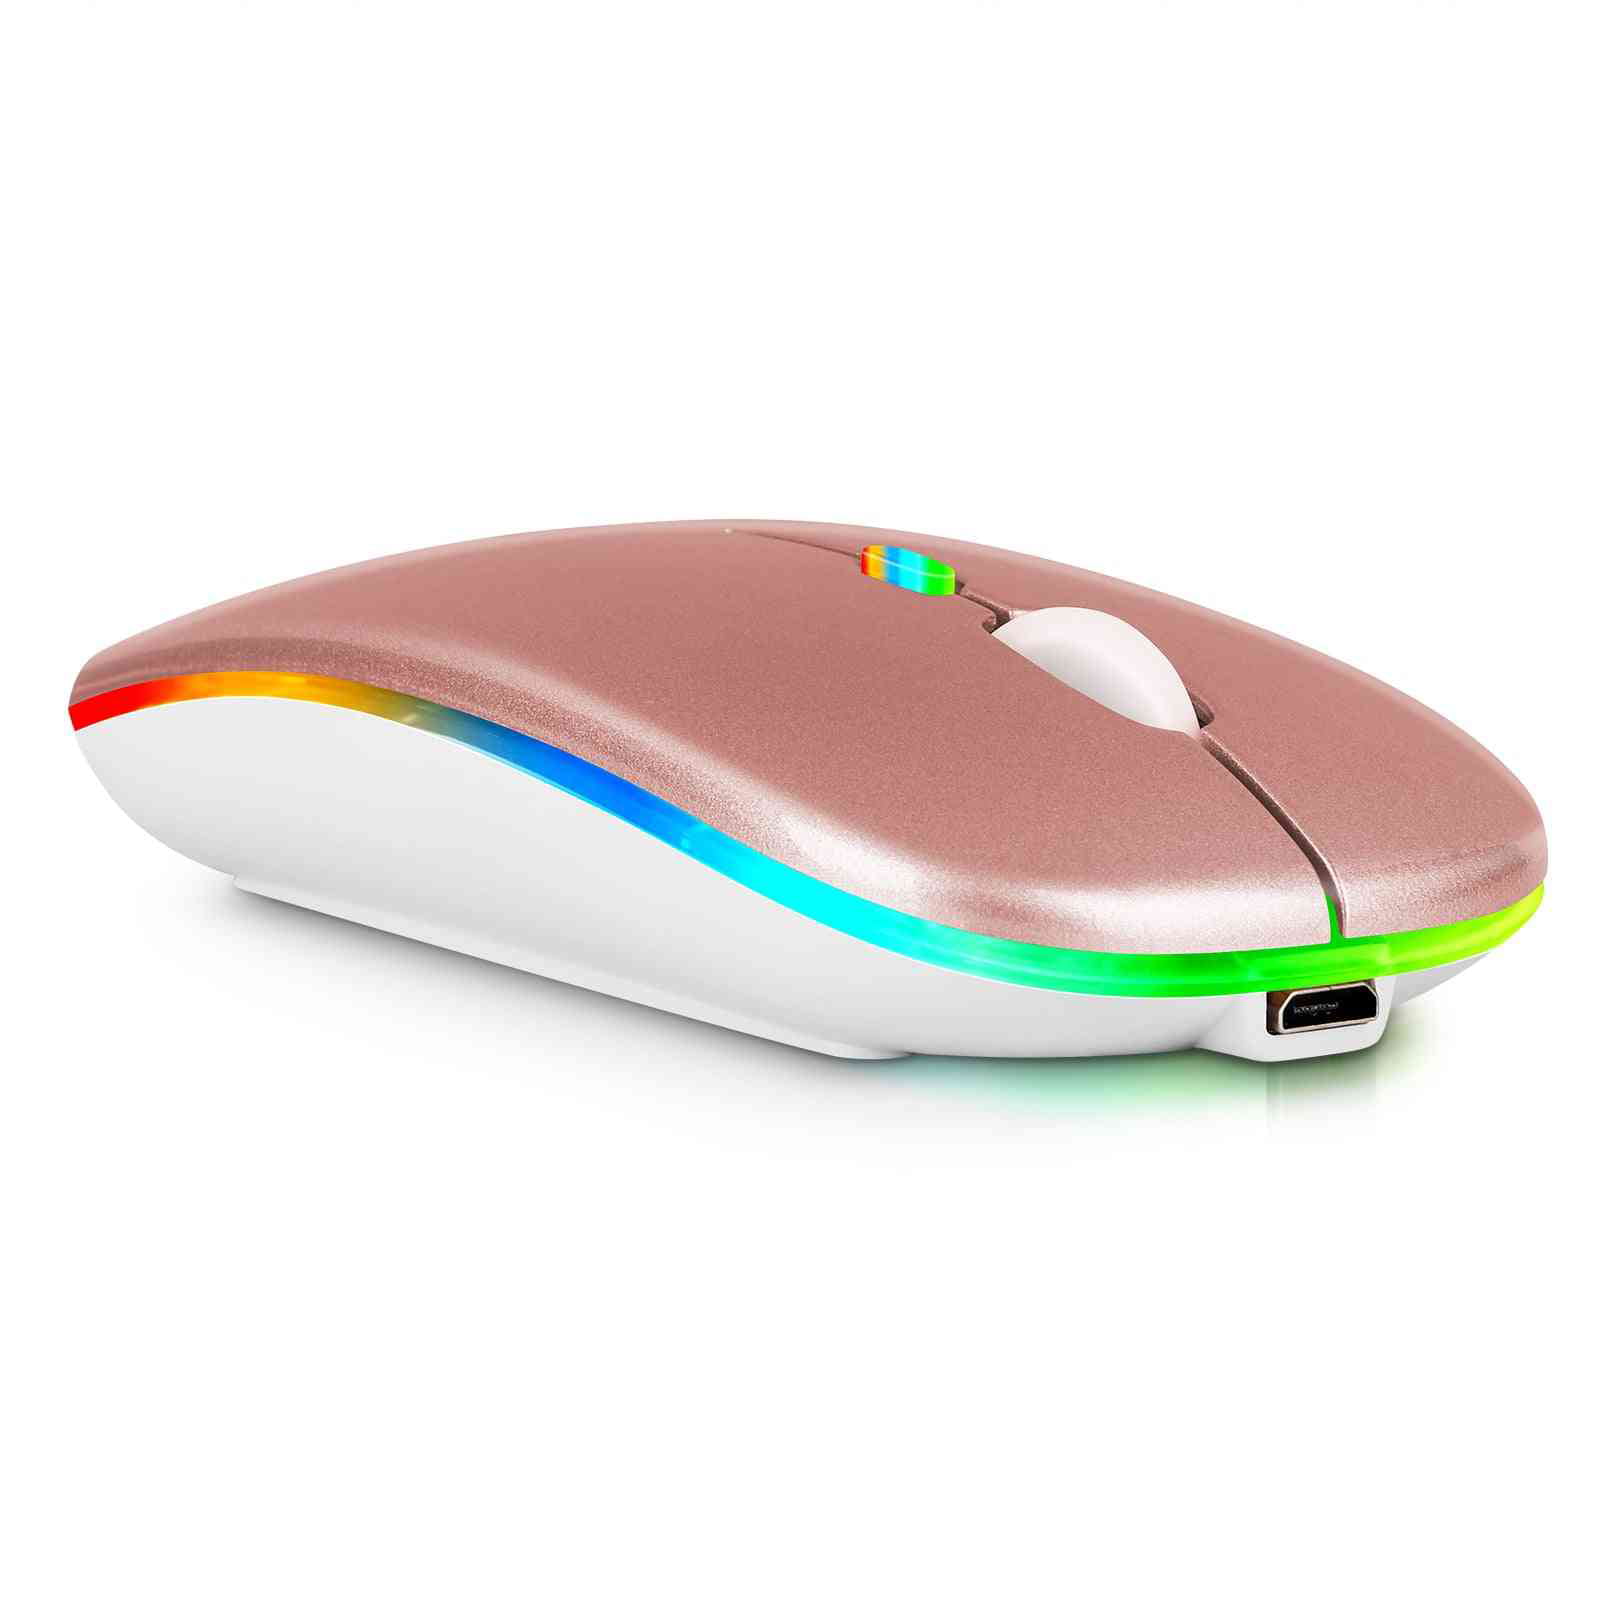 2.4GHz & Bluetooth Mouse, Rechargeable Wireless LED Mouse for LG 